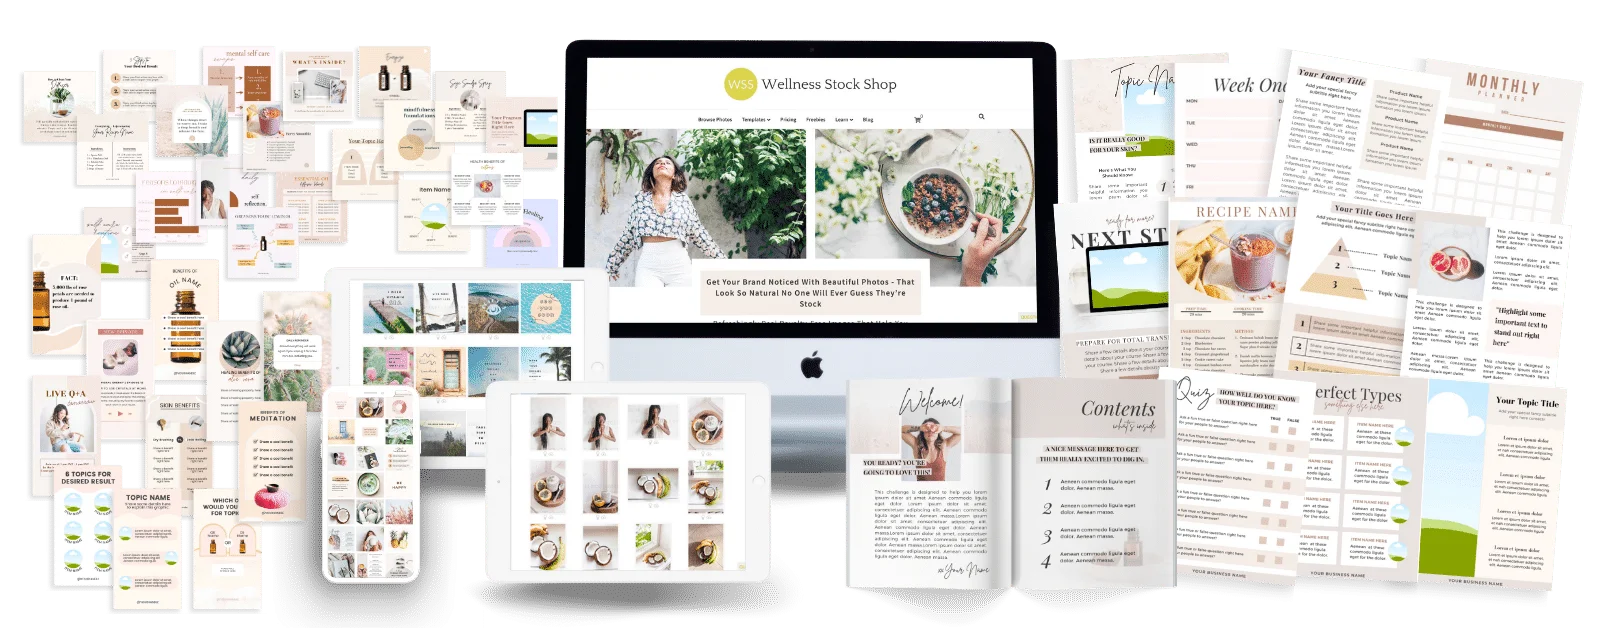 Social media graphics, Canva templates and stock photos included with a stock photo membership